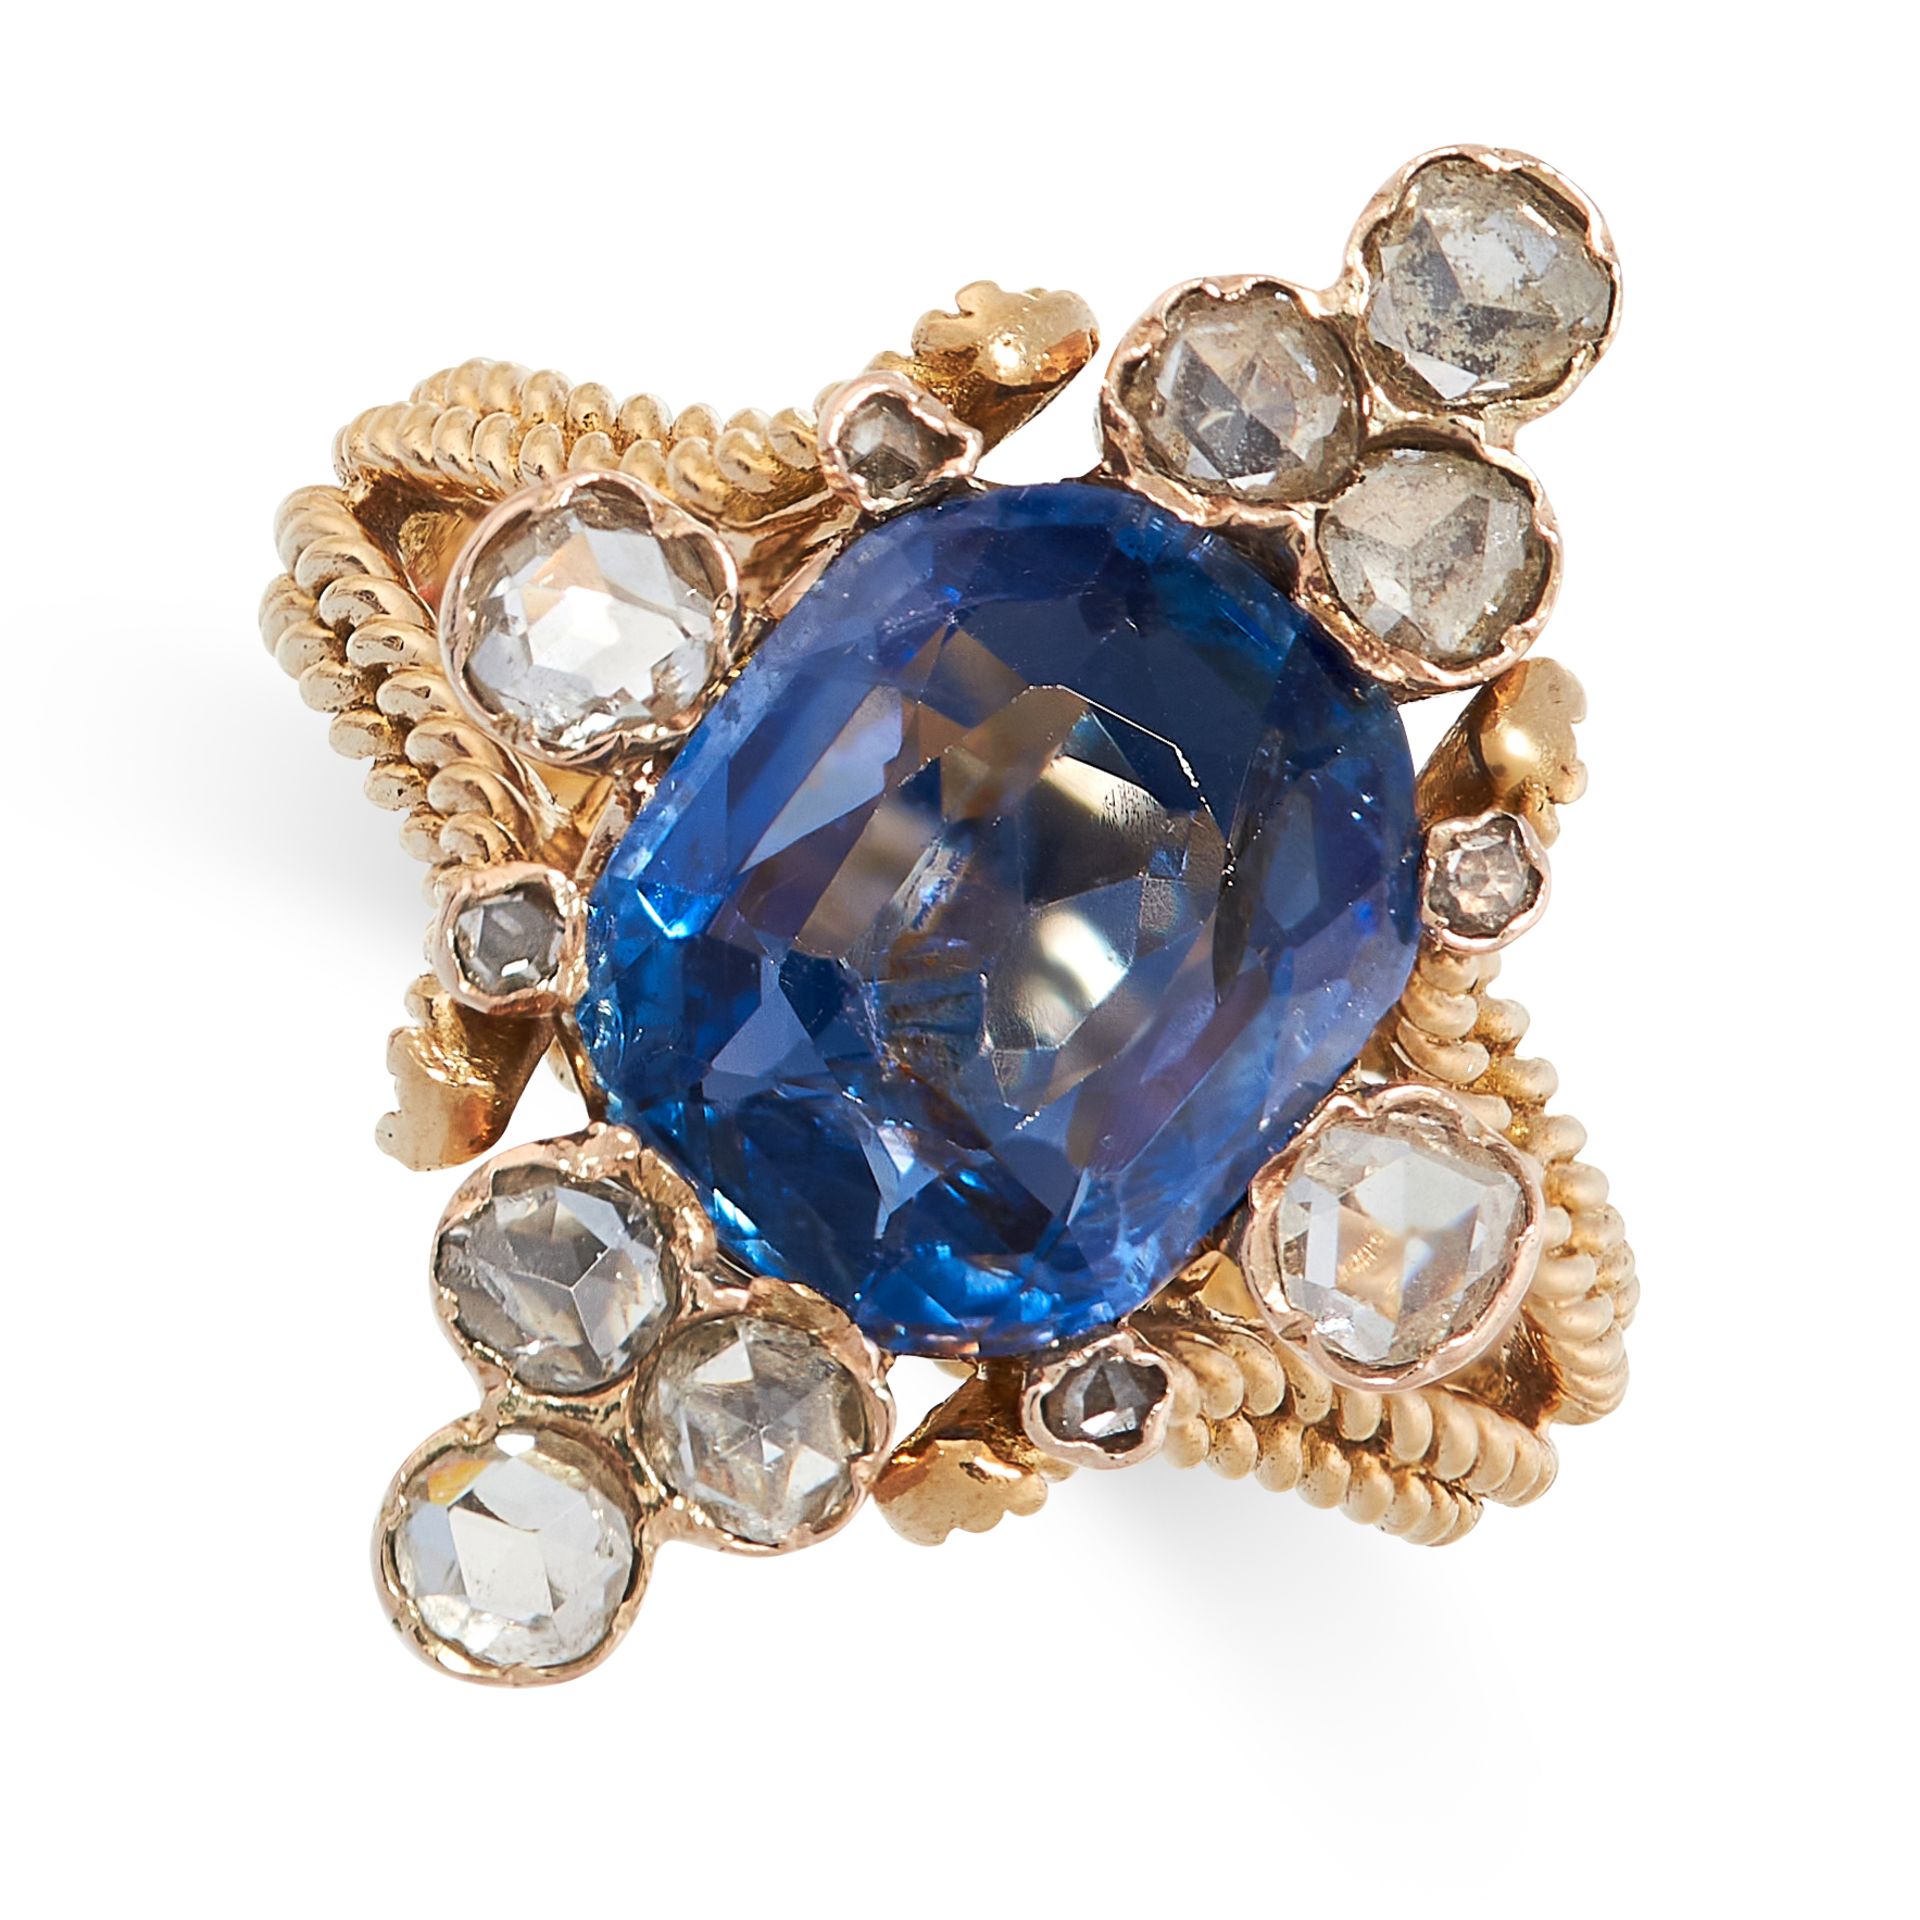 CEYLON NO HEAT SAPPHIRE AND DIAMOND RING set with a cushion cut sapphire of 3.49 carats accented